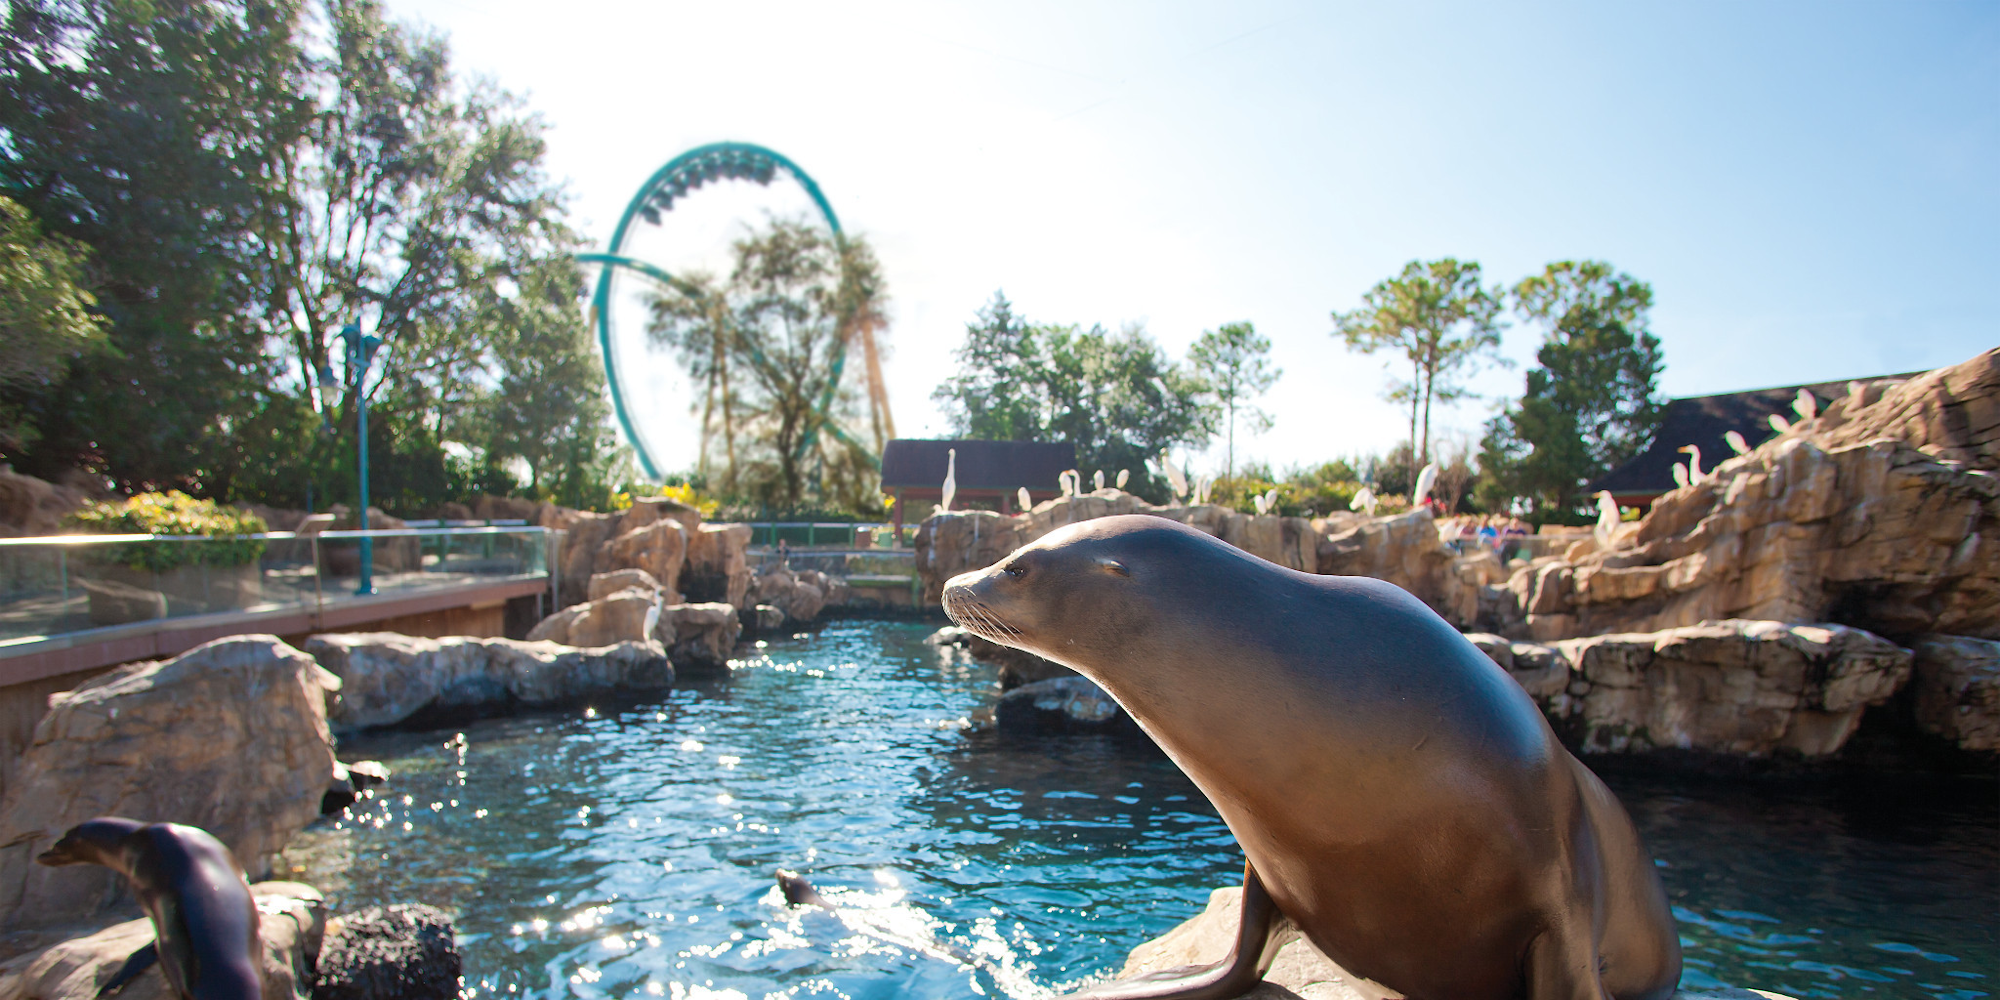 Sea Lion on Rock at SeaWorld Orlando with Coaster in the Background